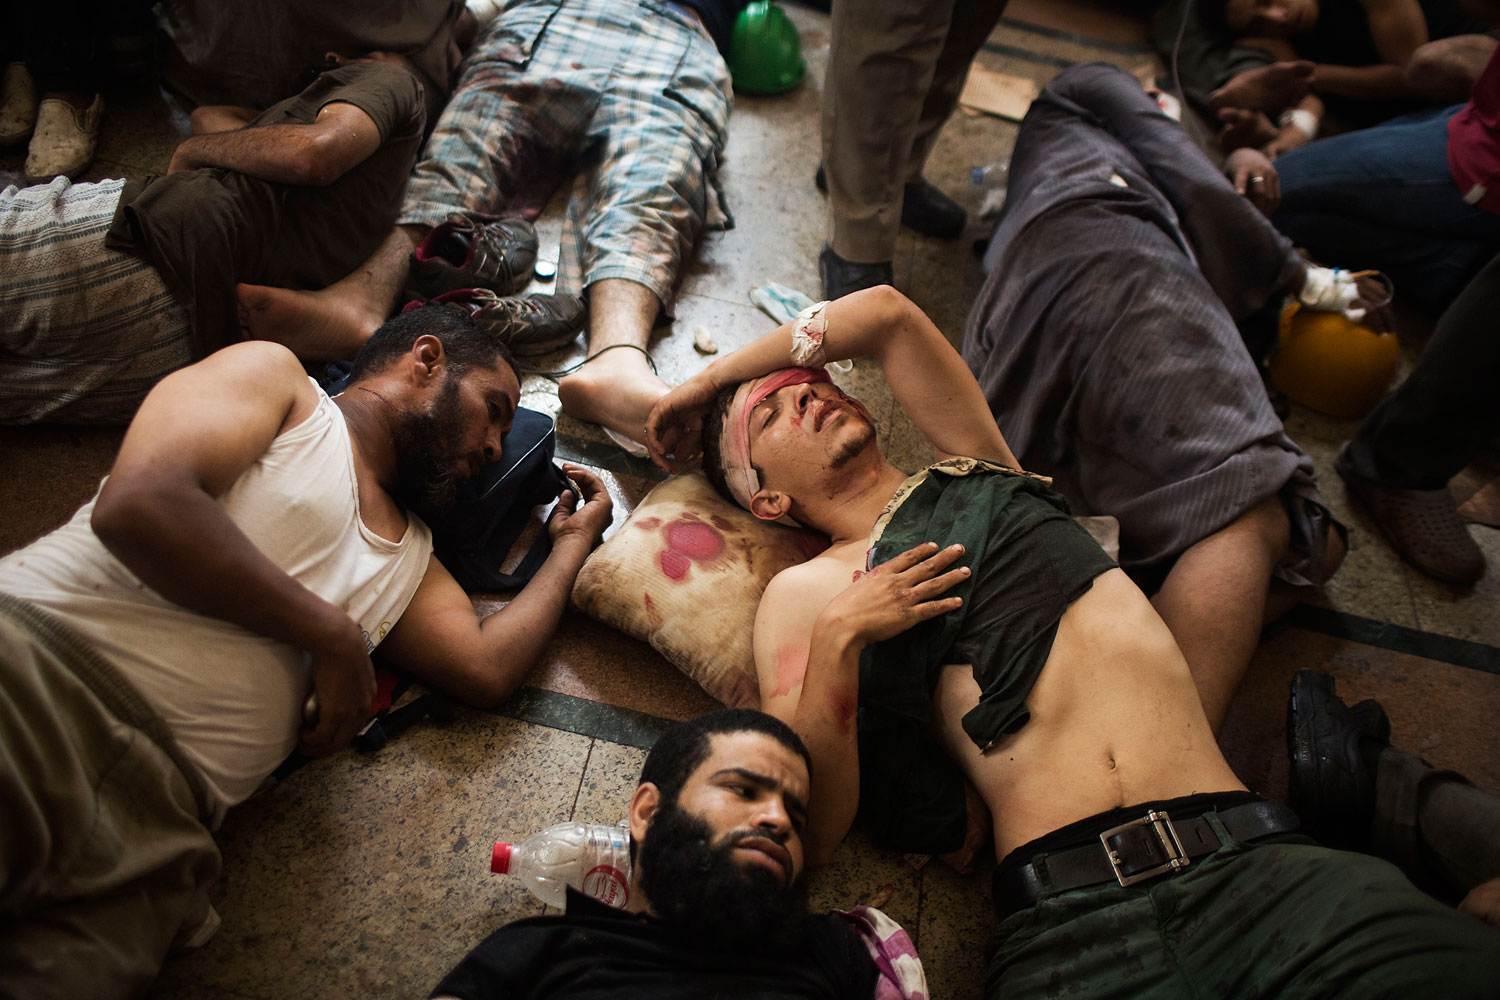 Wounded supporters of ousted Islamist President Mohammed Morsi lie on the floor of a makeshift hospital at a sit-in at Cairo's Nasr City district, Egypt, Aug. 14, 2013.